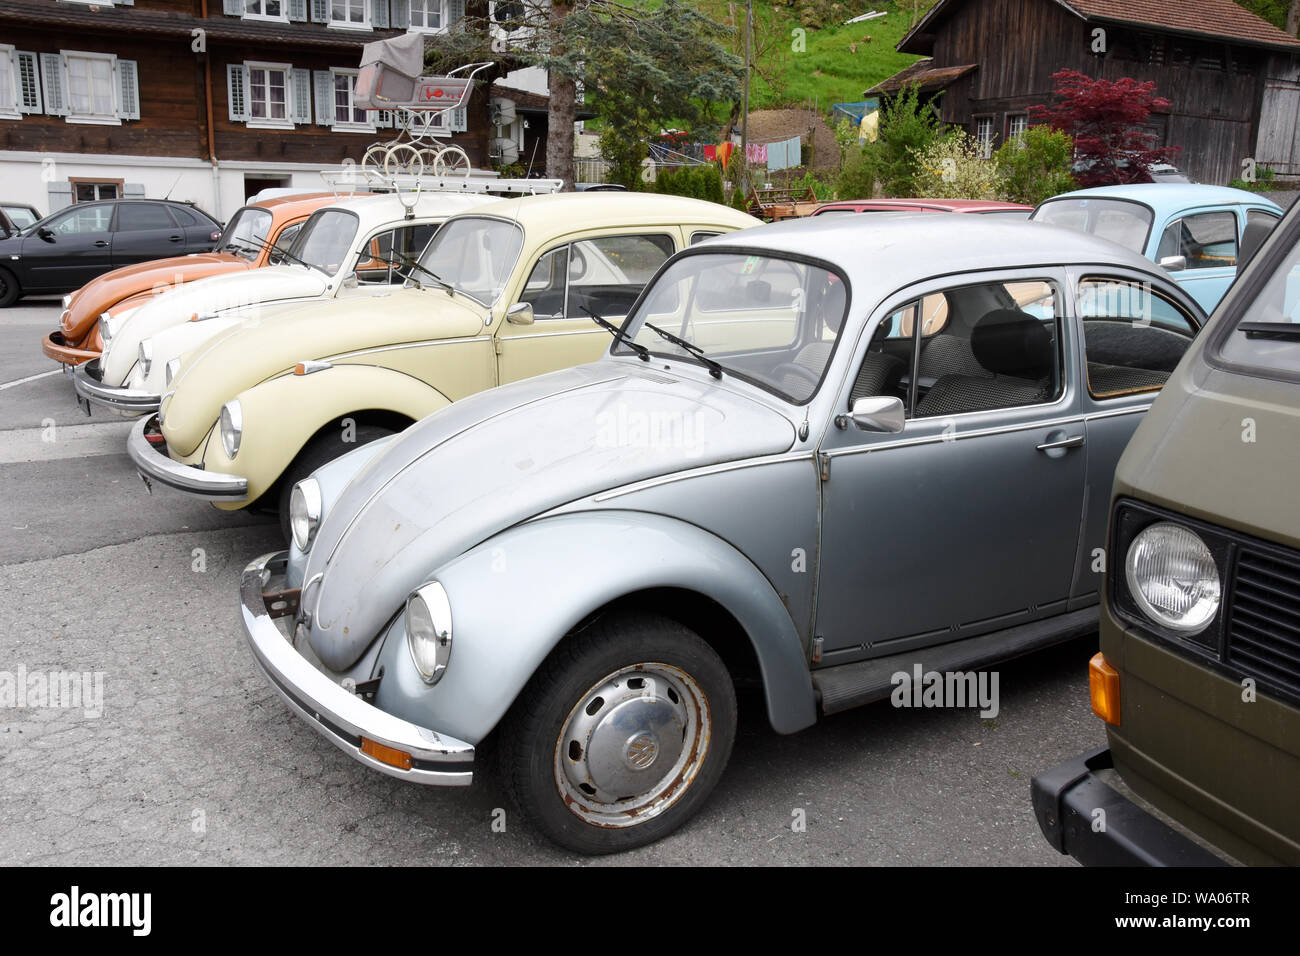 Vw Kafer High Resolution Stock Photography and Images - Alamy